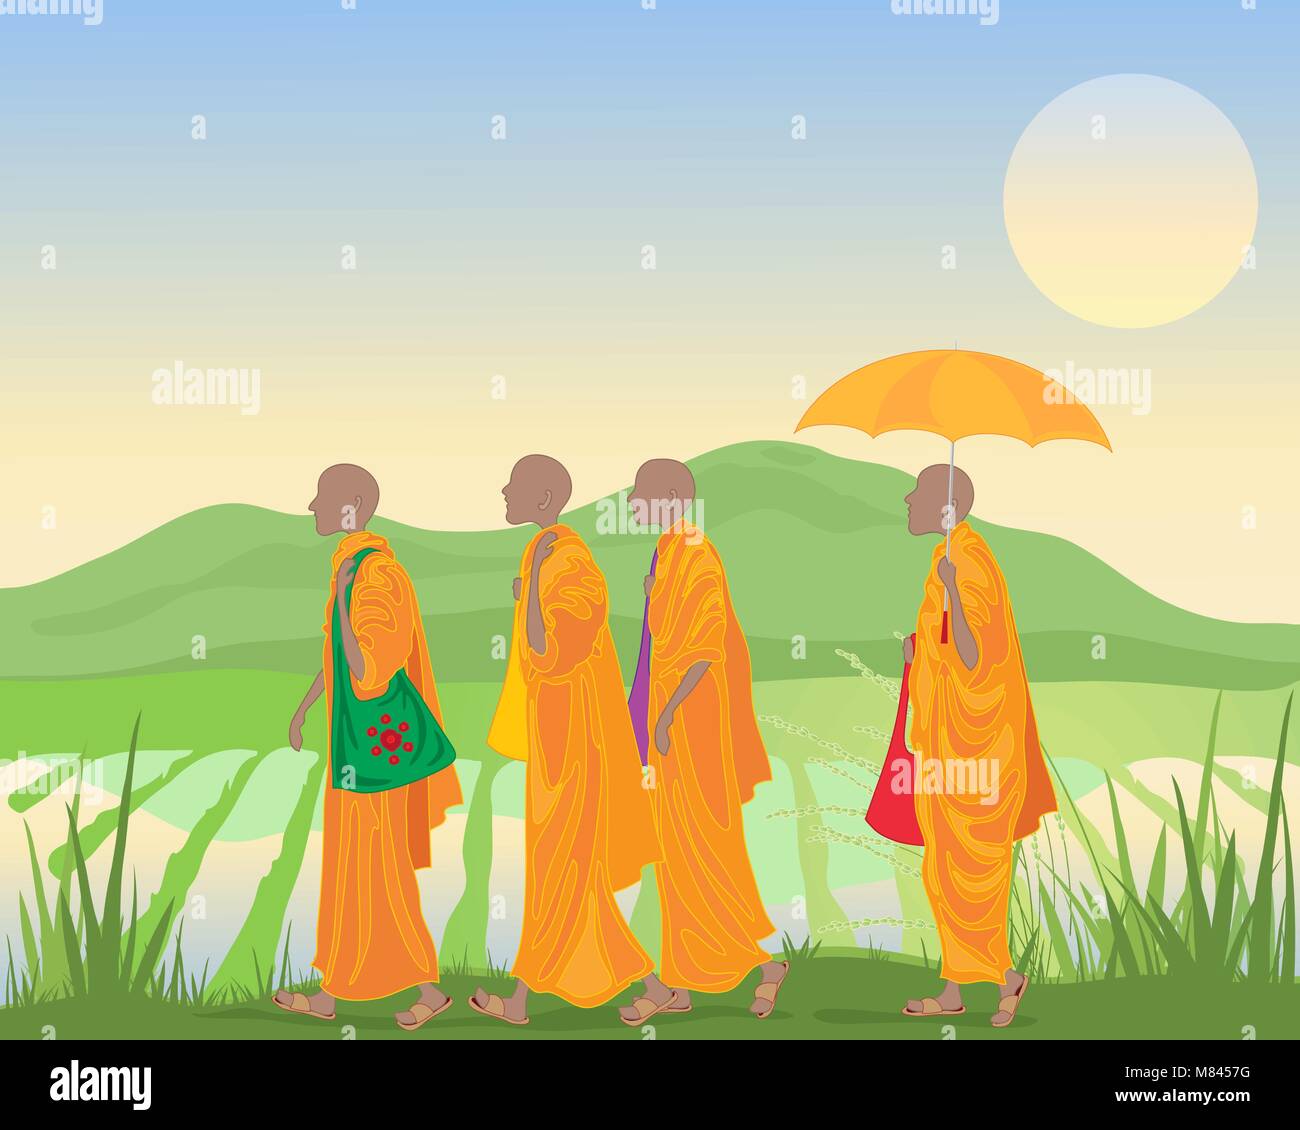 a vector illustration in eps 10 format of Buddhist monks in orange robes walking by a paddy field with mountains in Asia Stock Vector